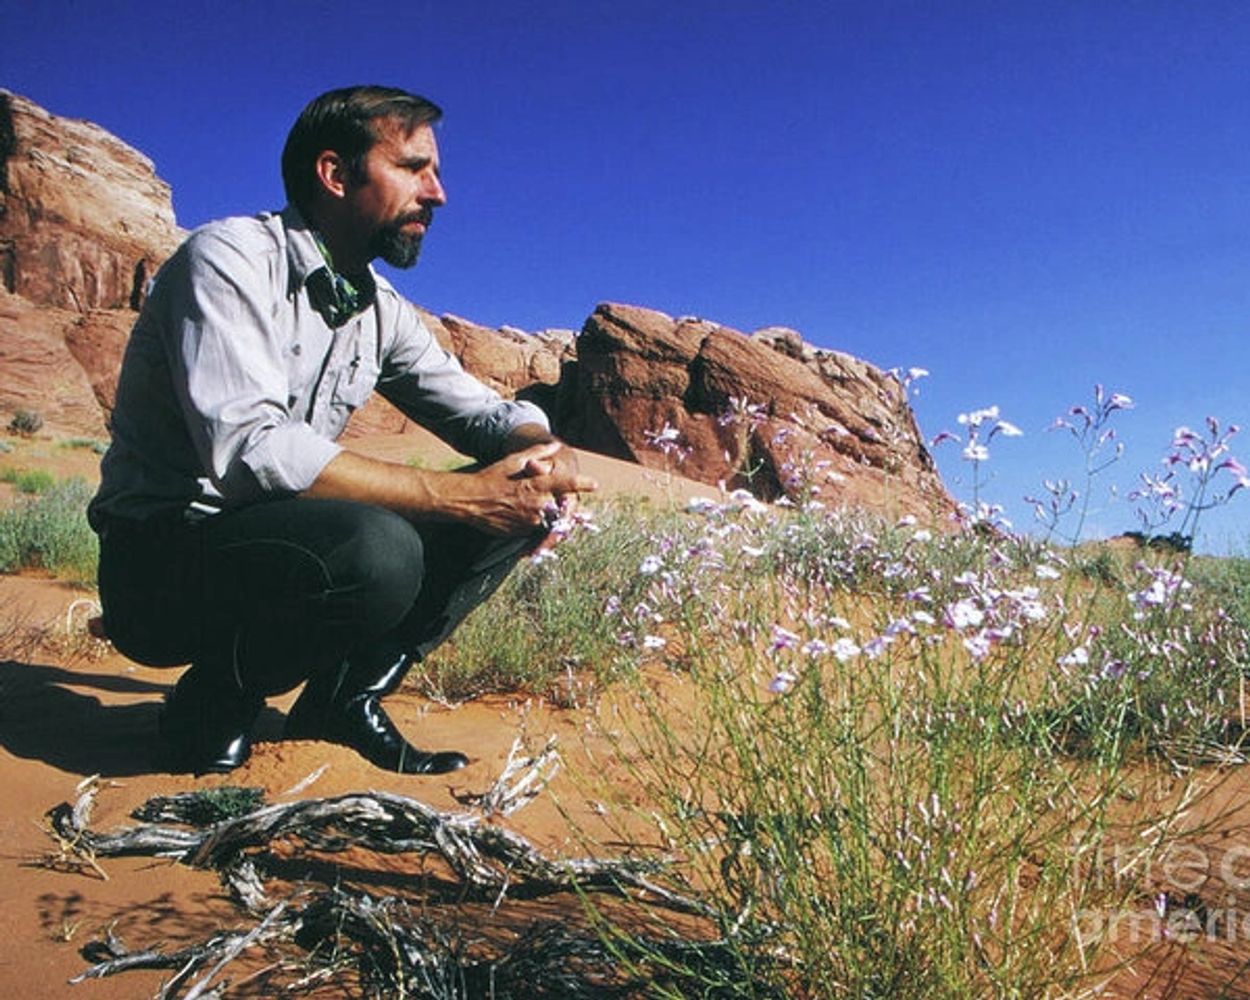 Edward Paul Abbey looks across the desert surrounded by rock formations, driftwood, and wildflowers.